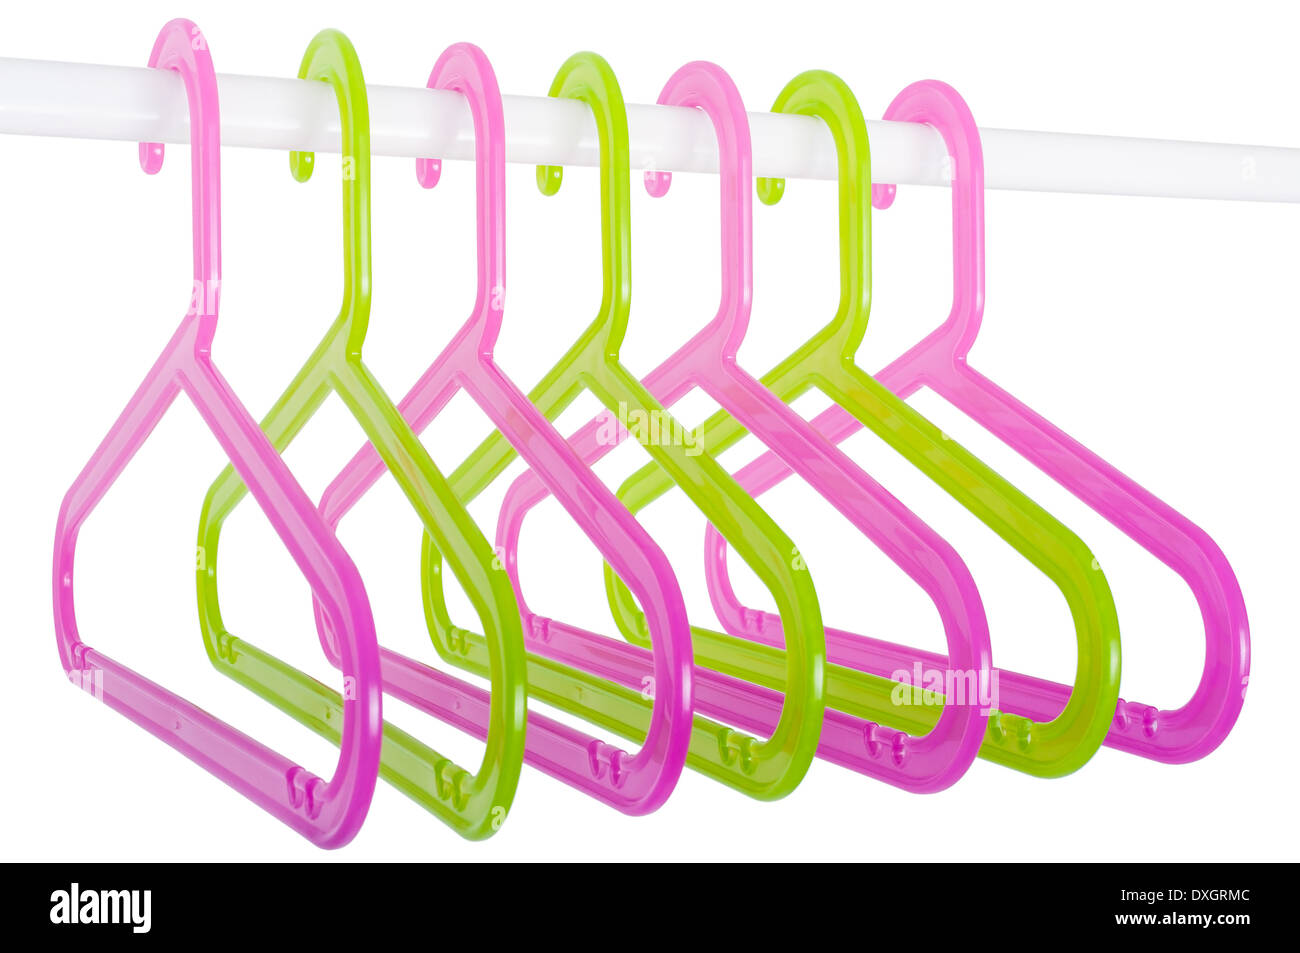 Colored plastic hangers hanging on a rod isolated on white background Stock Photo